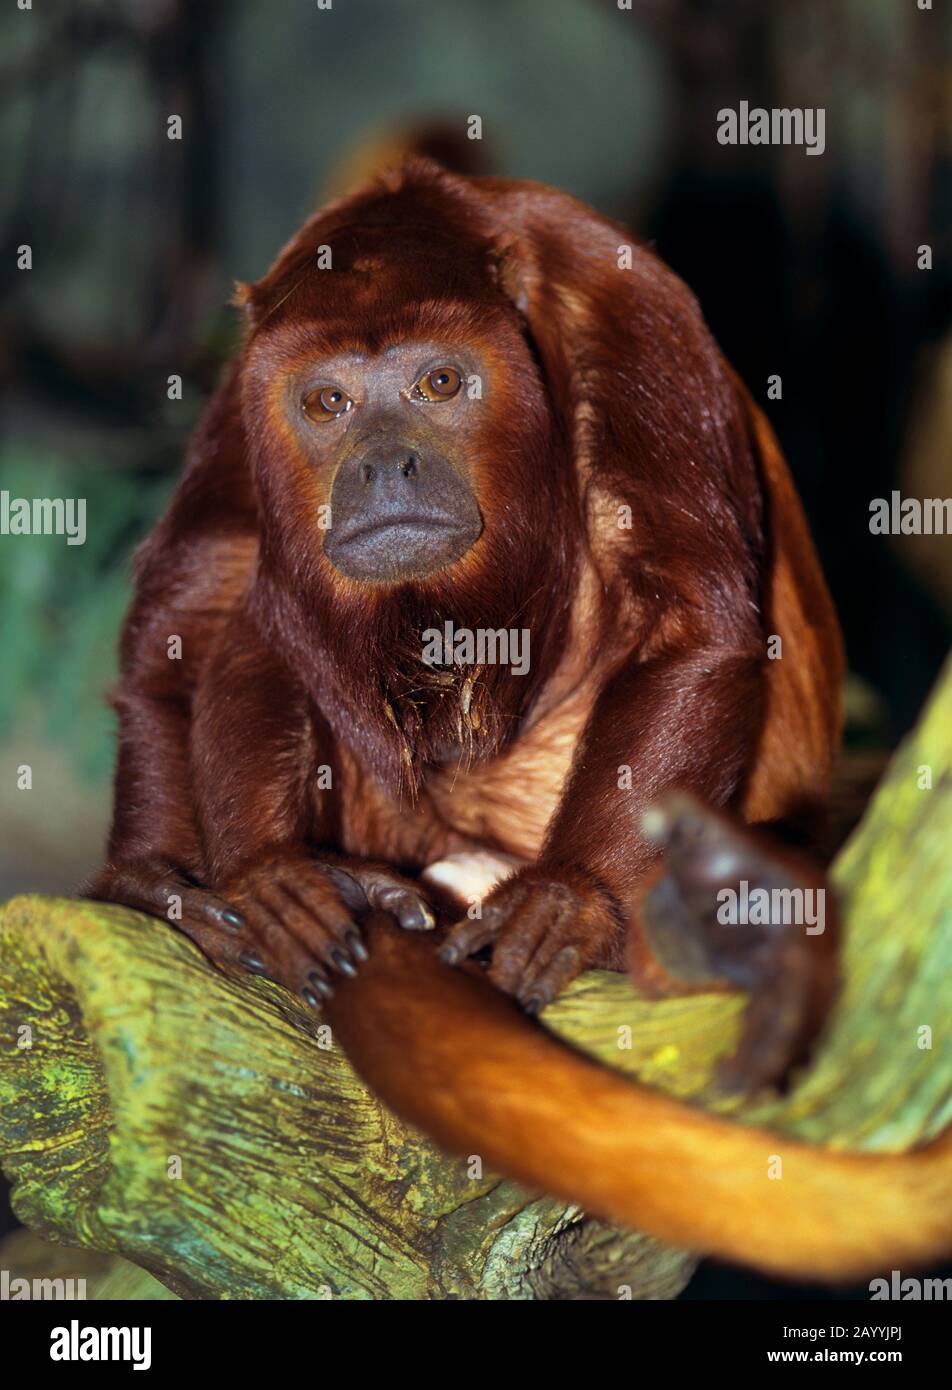 Red Howler Monkey (Alouatta ursina), sitting on a branch, front view Stock Photo